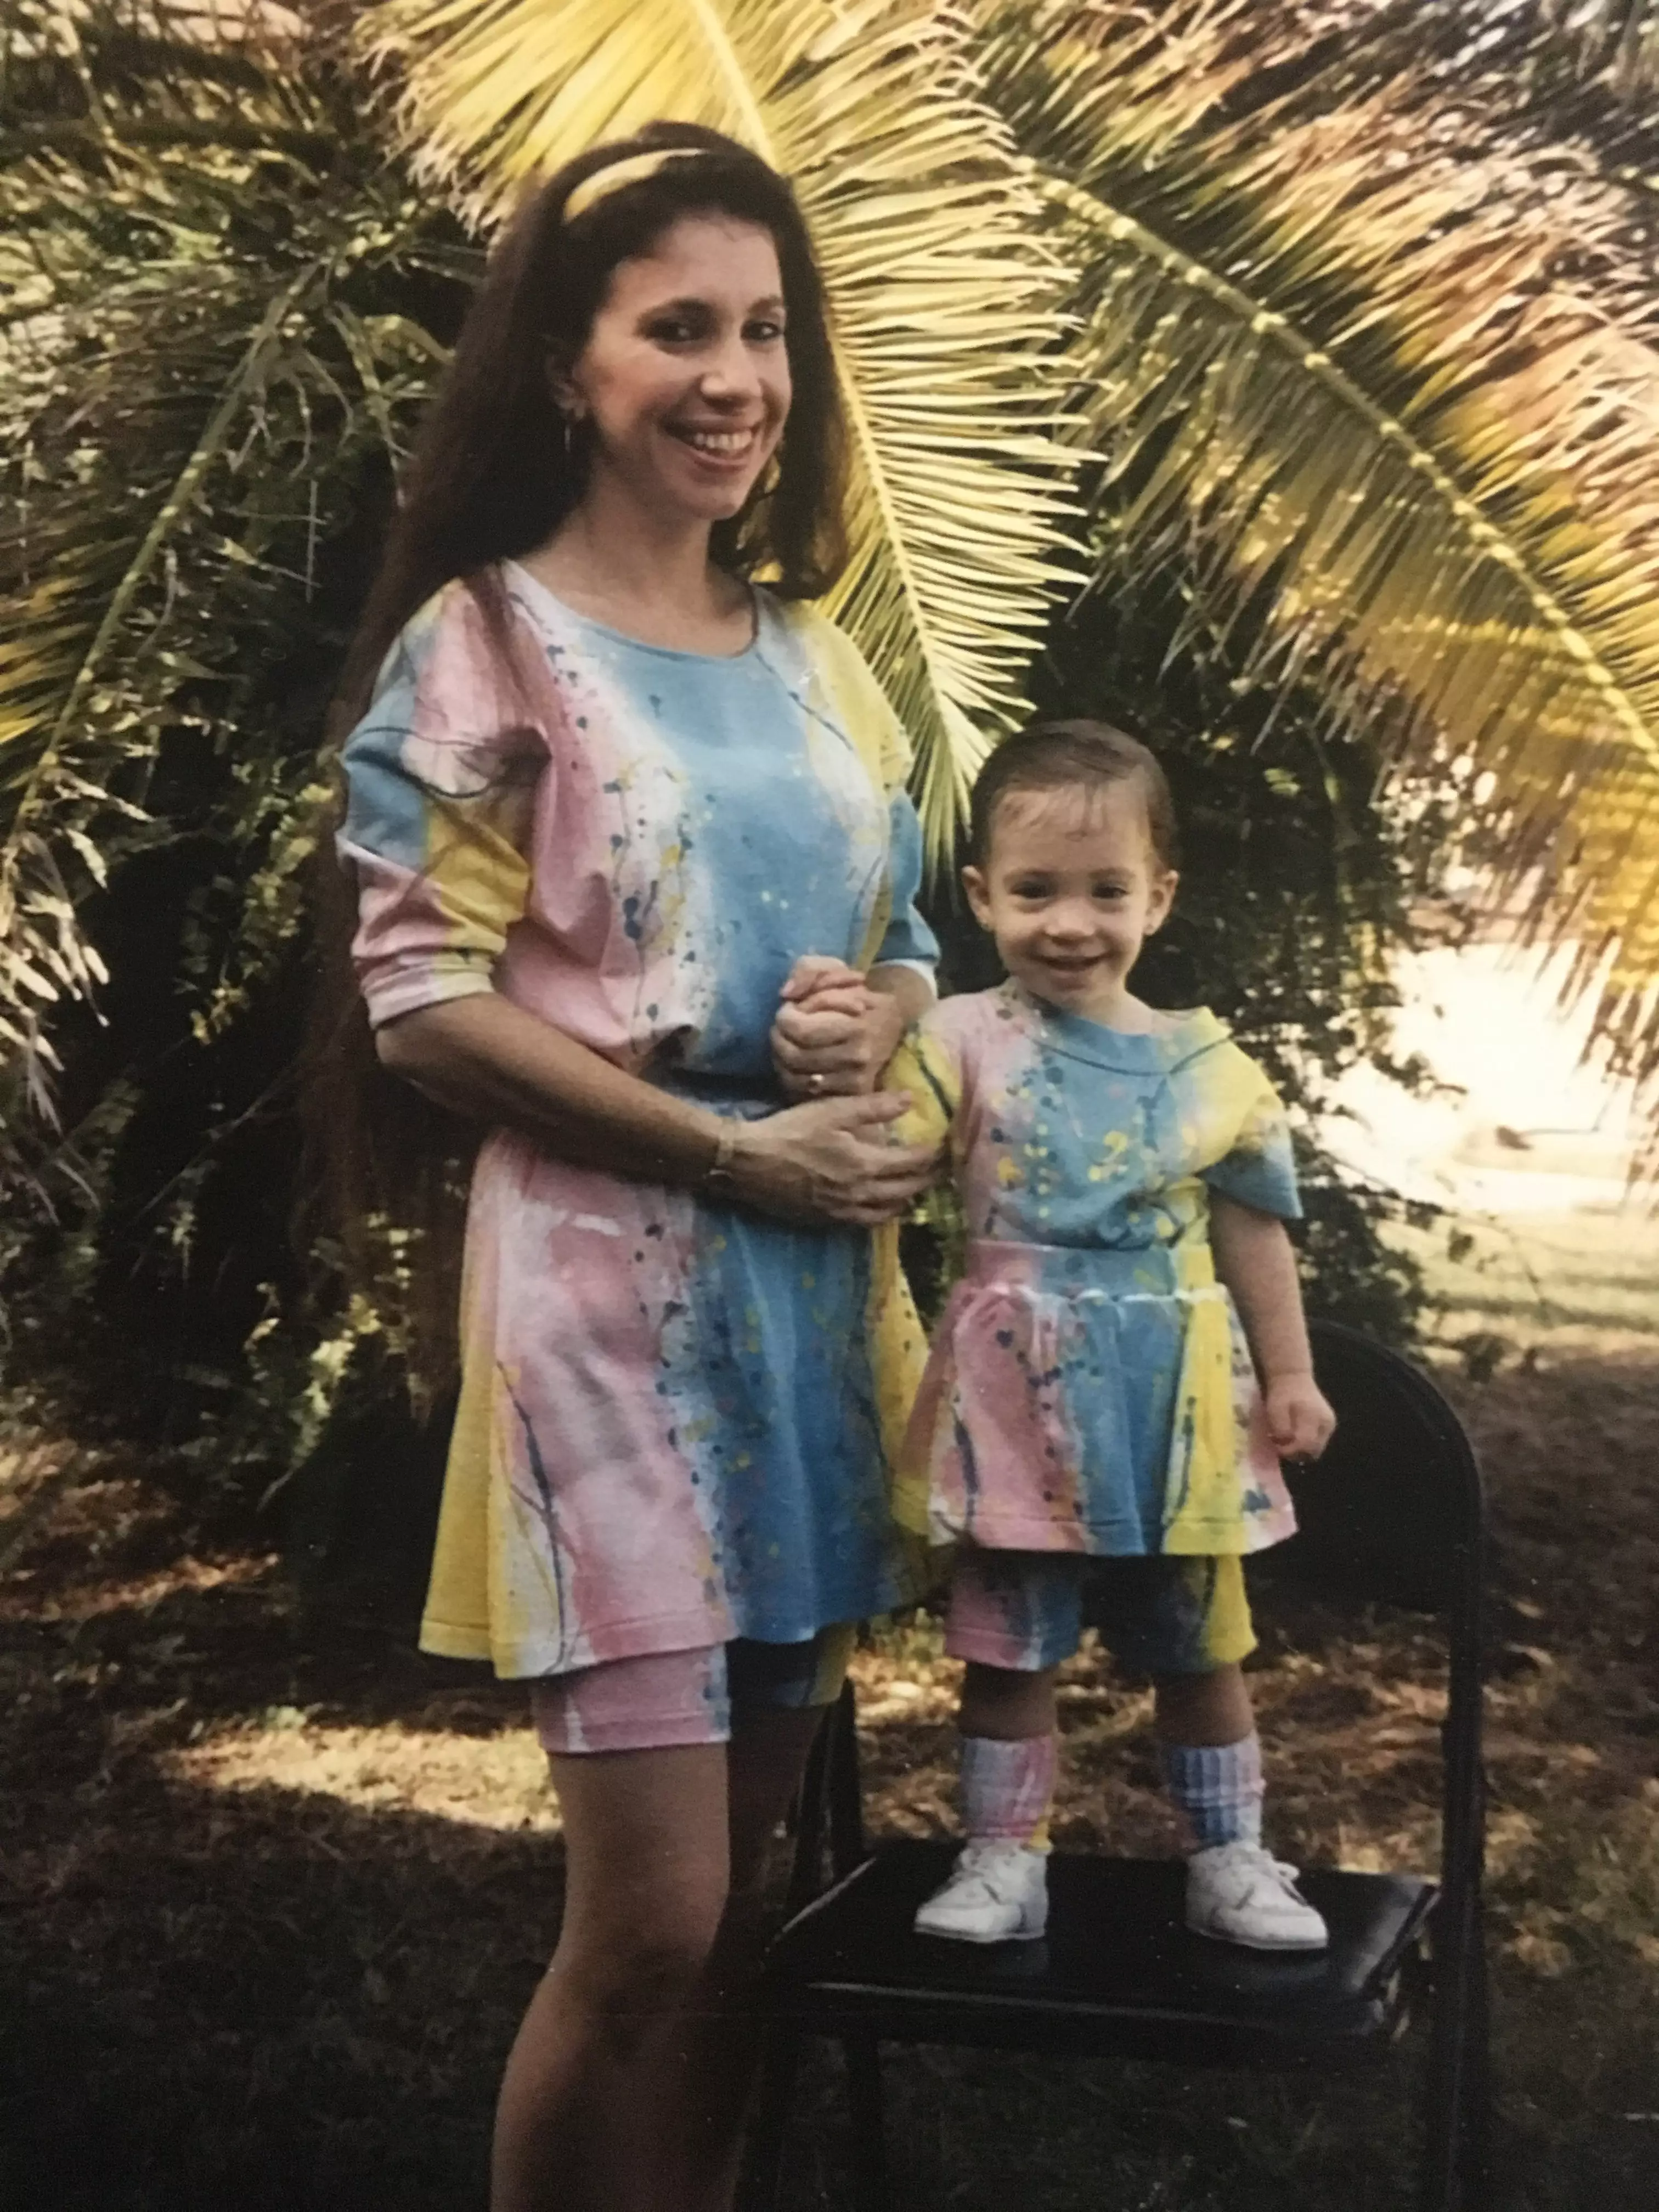 The mother and daughter have always had a strong resemblance.